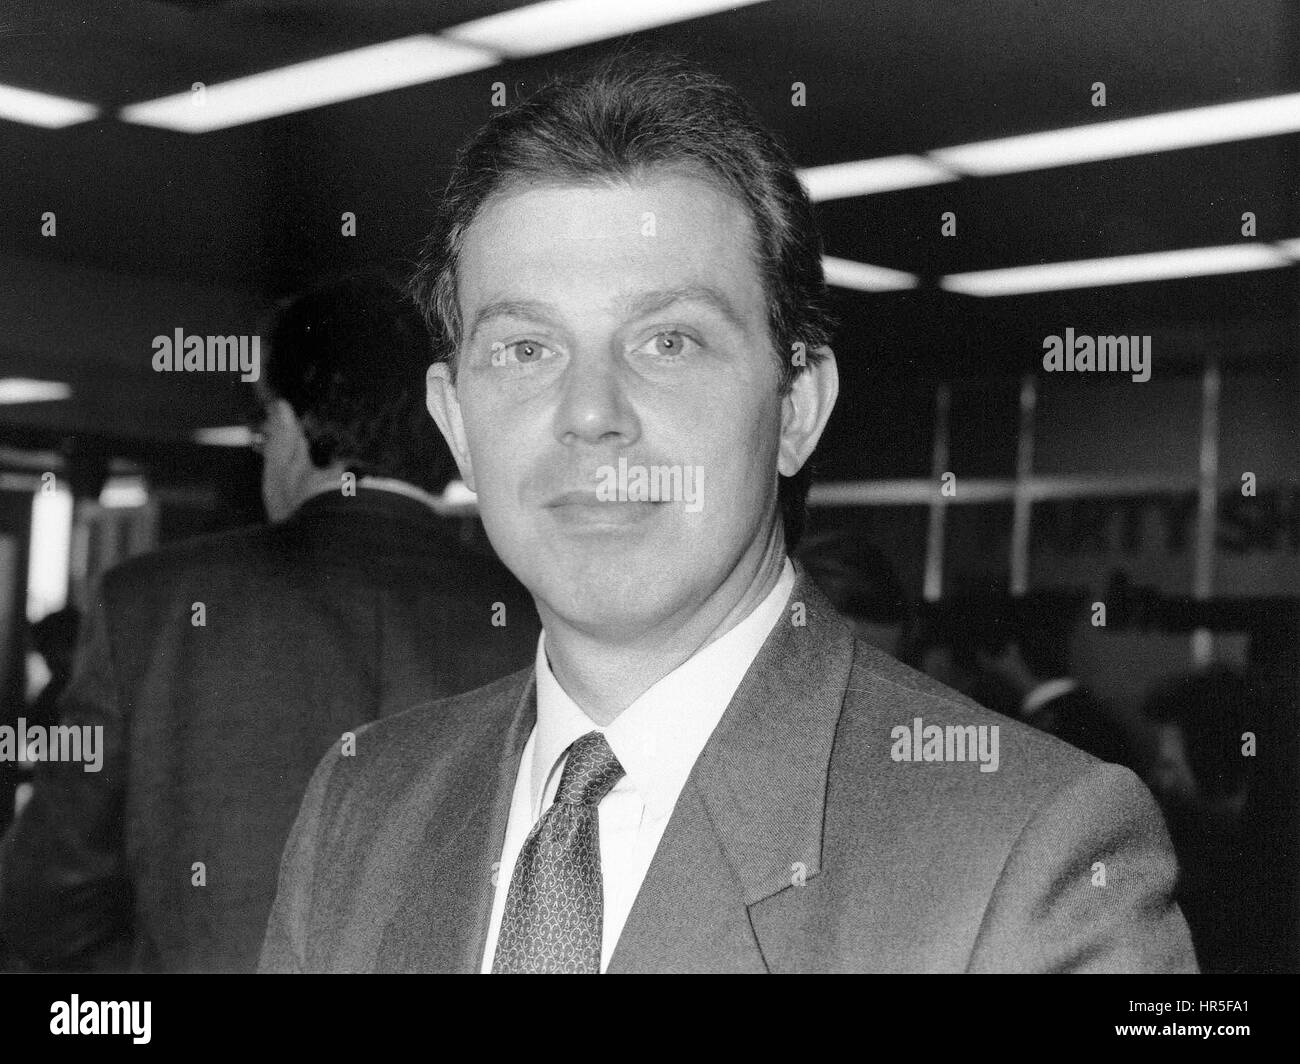 Tony Blair, Labour party Member of Parliament for Sedgefield, attends the annual party conference in Brighton, England on October 1, 1991. He later went on to become party Leader and Prime Minister of Britain. Stock Photo